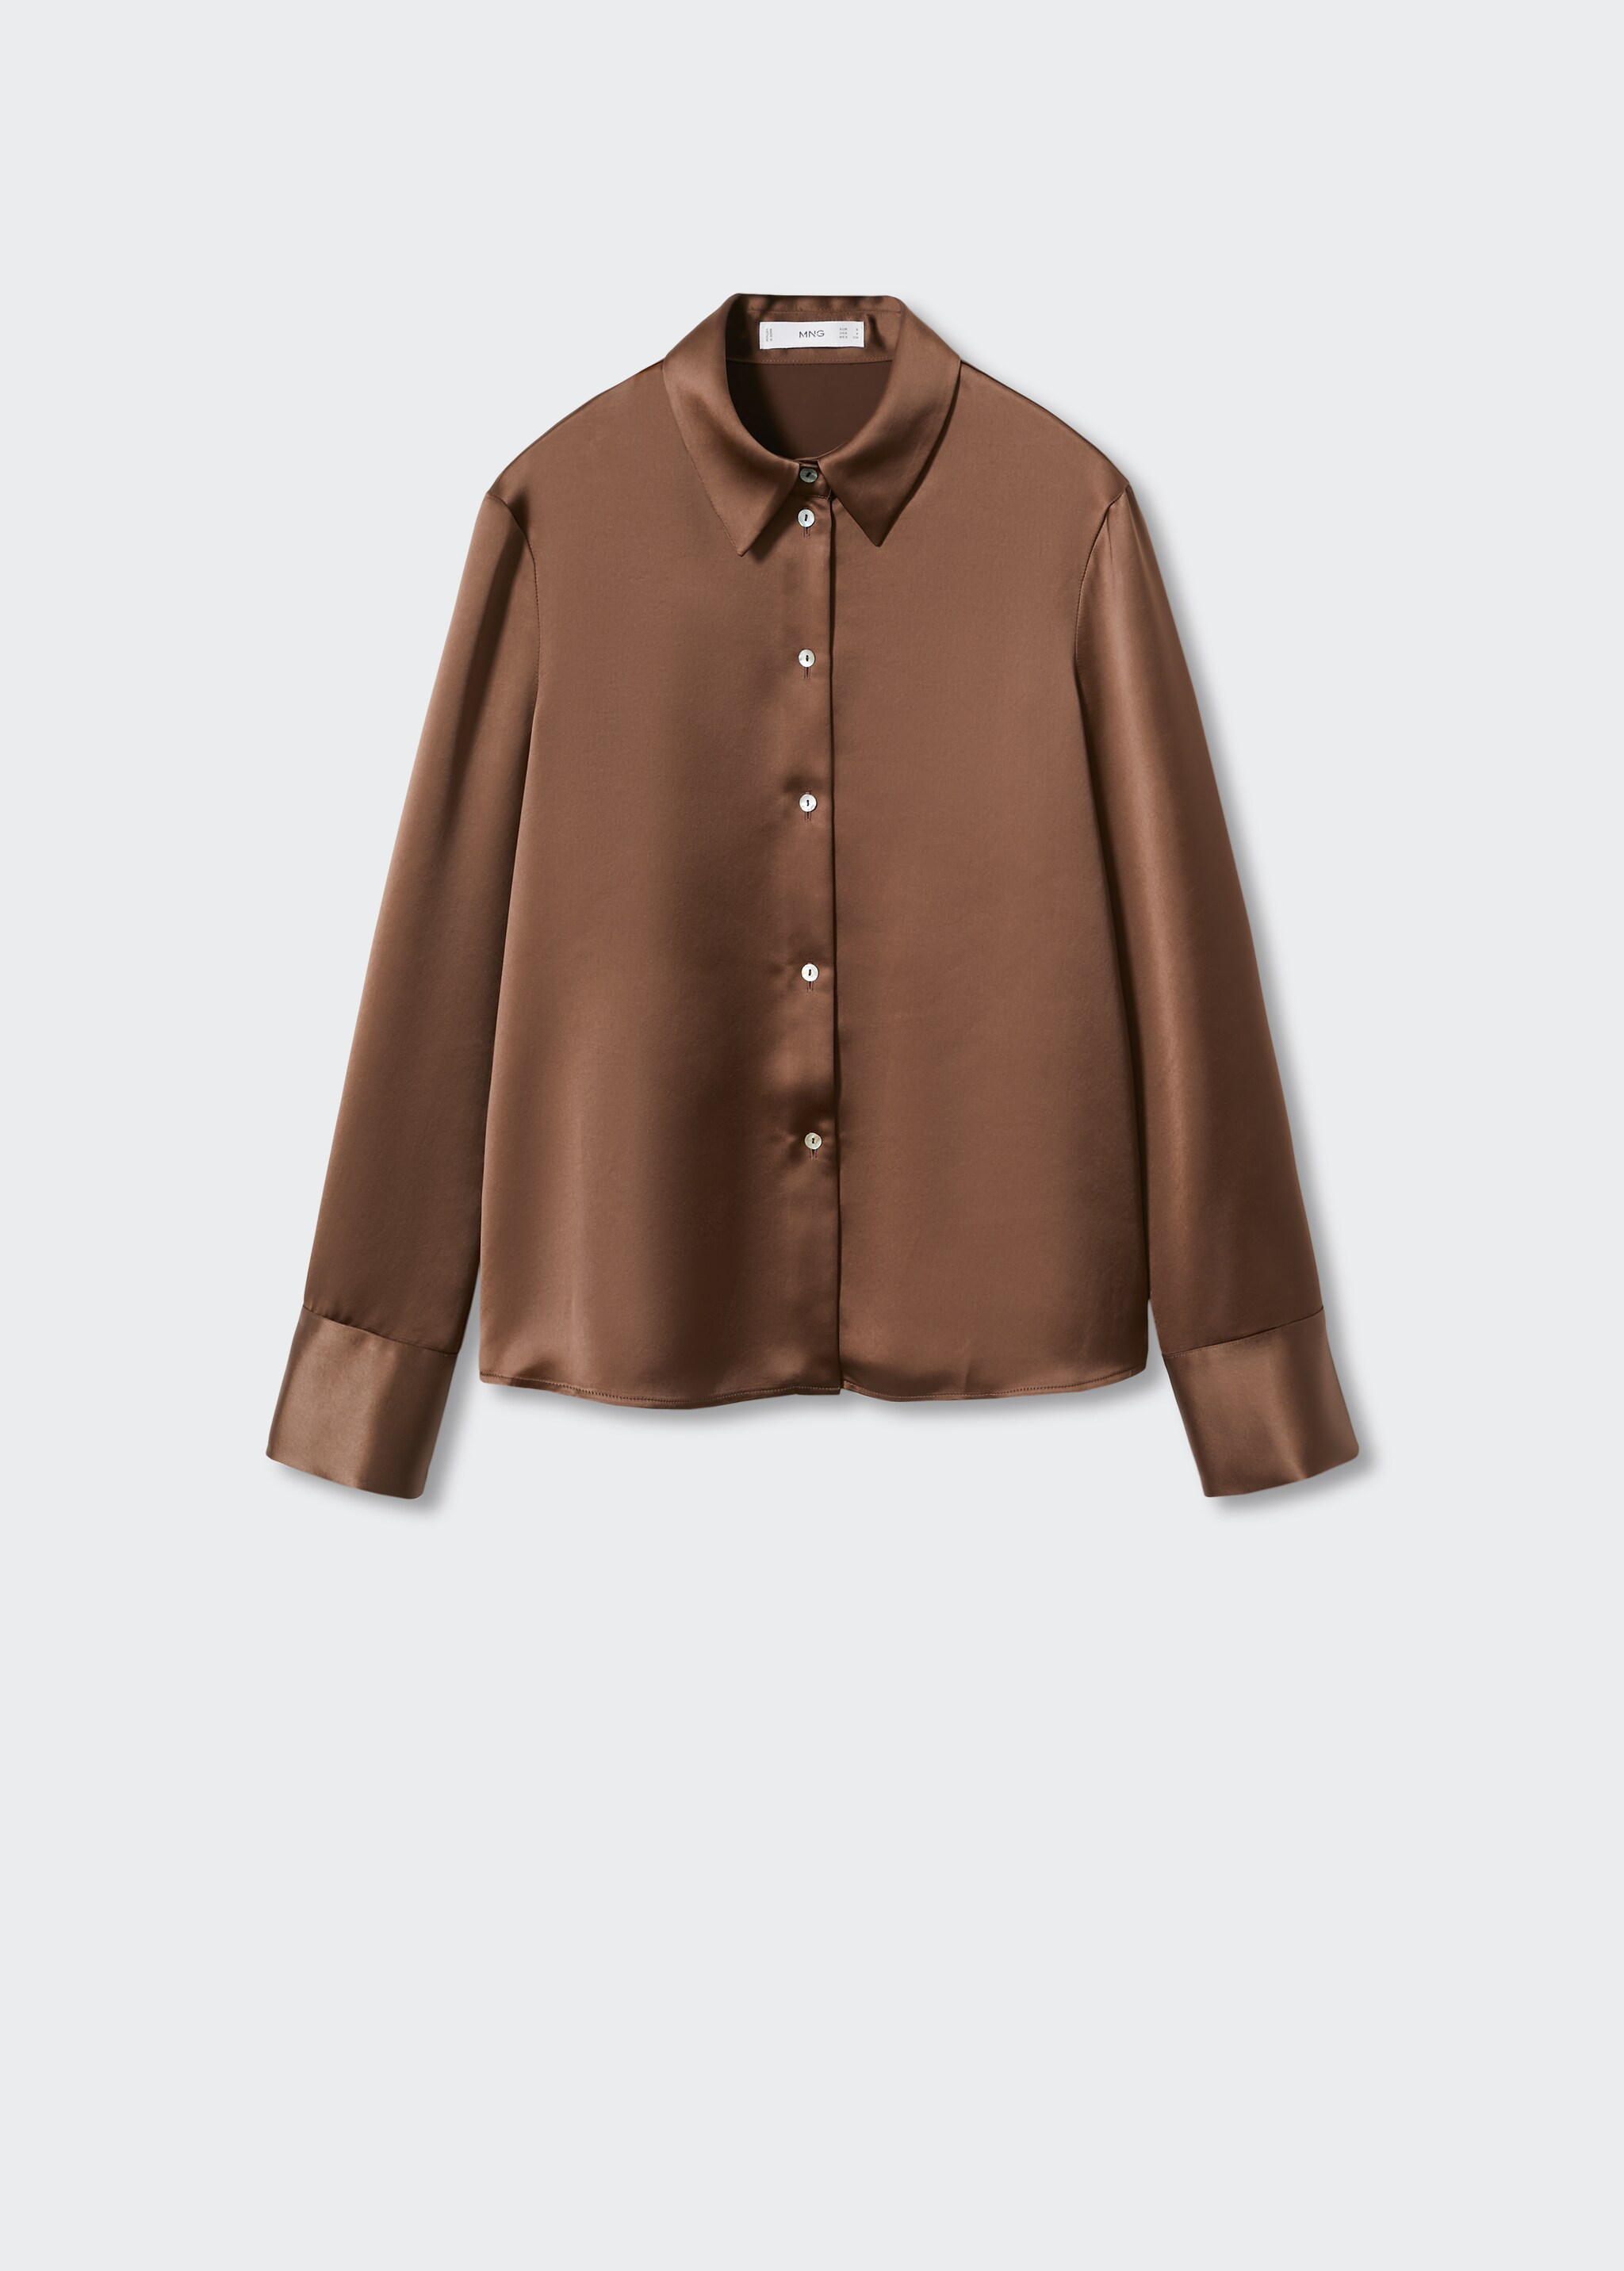 Satin buttoned shirt - Article without model